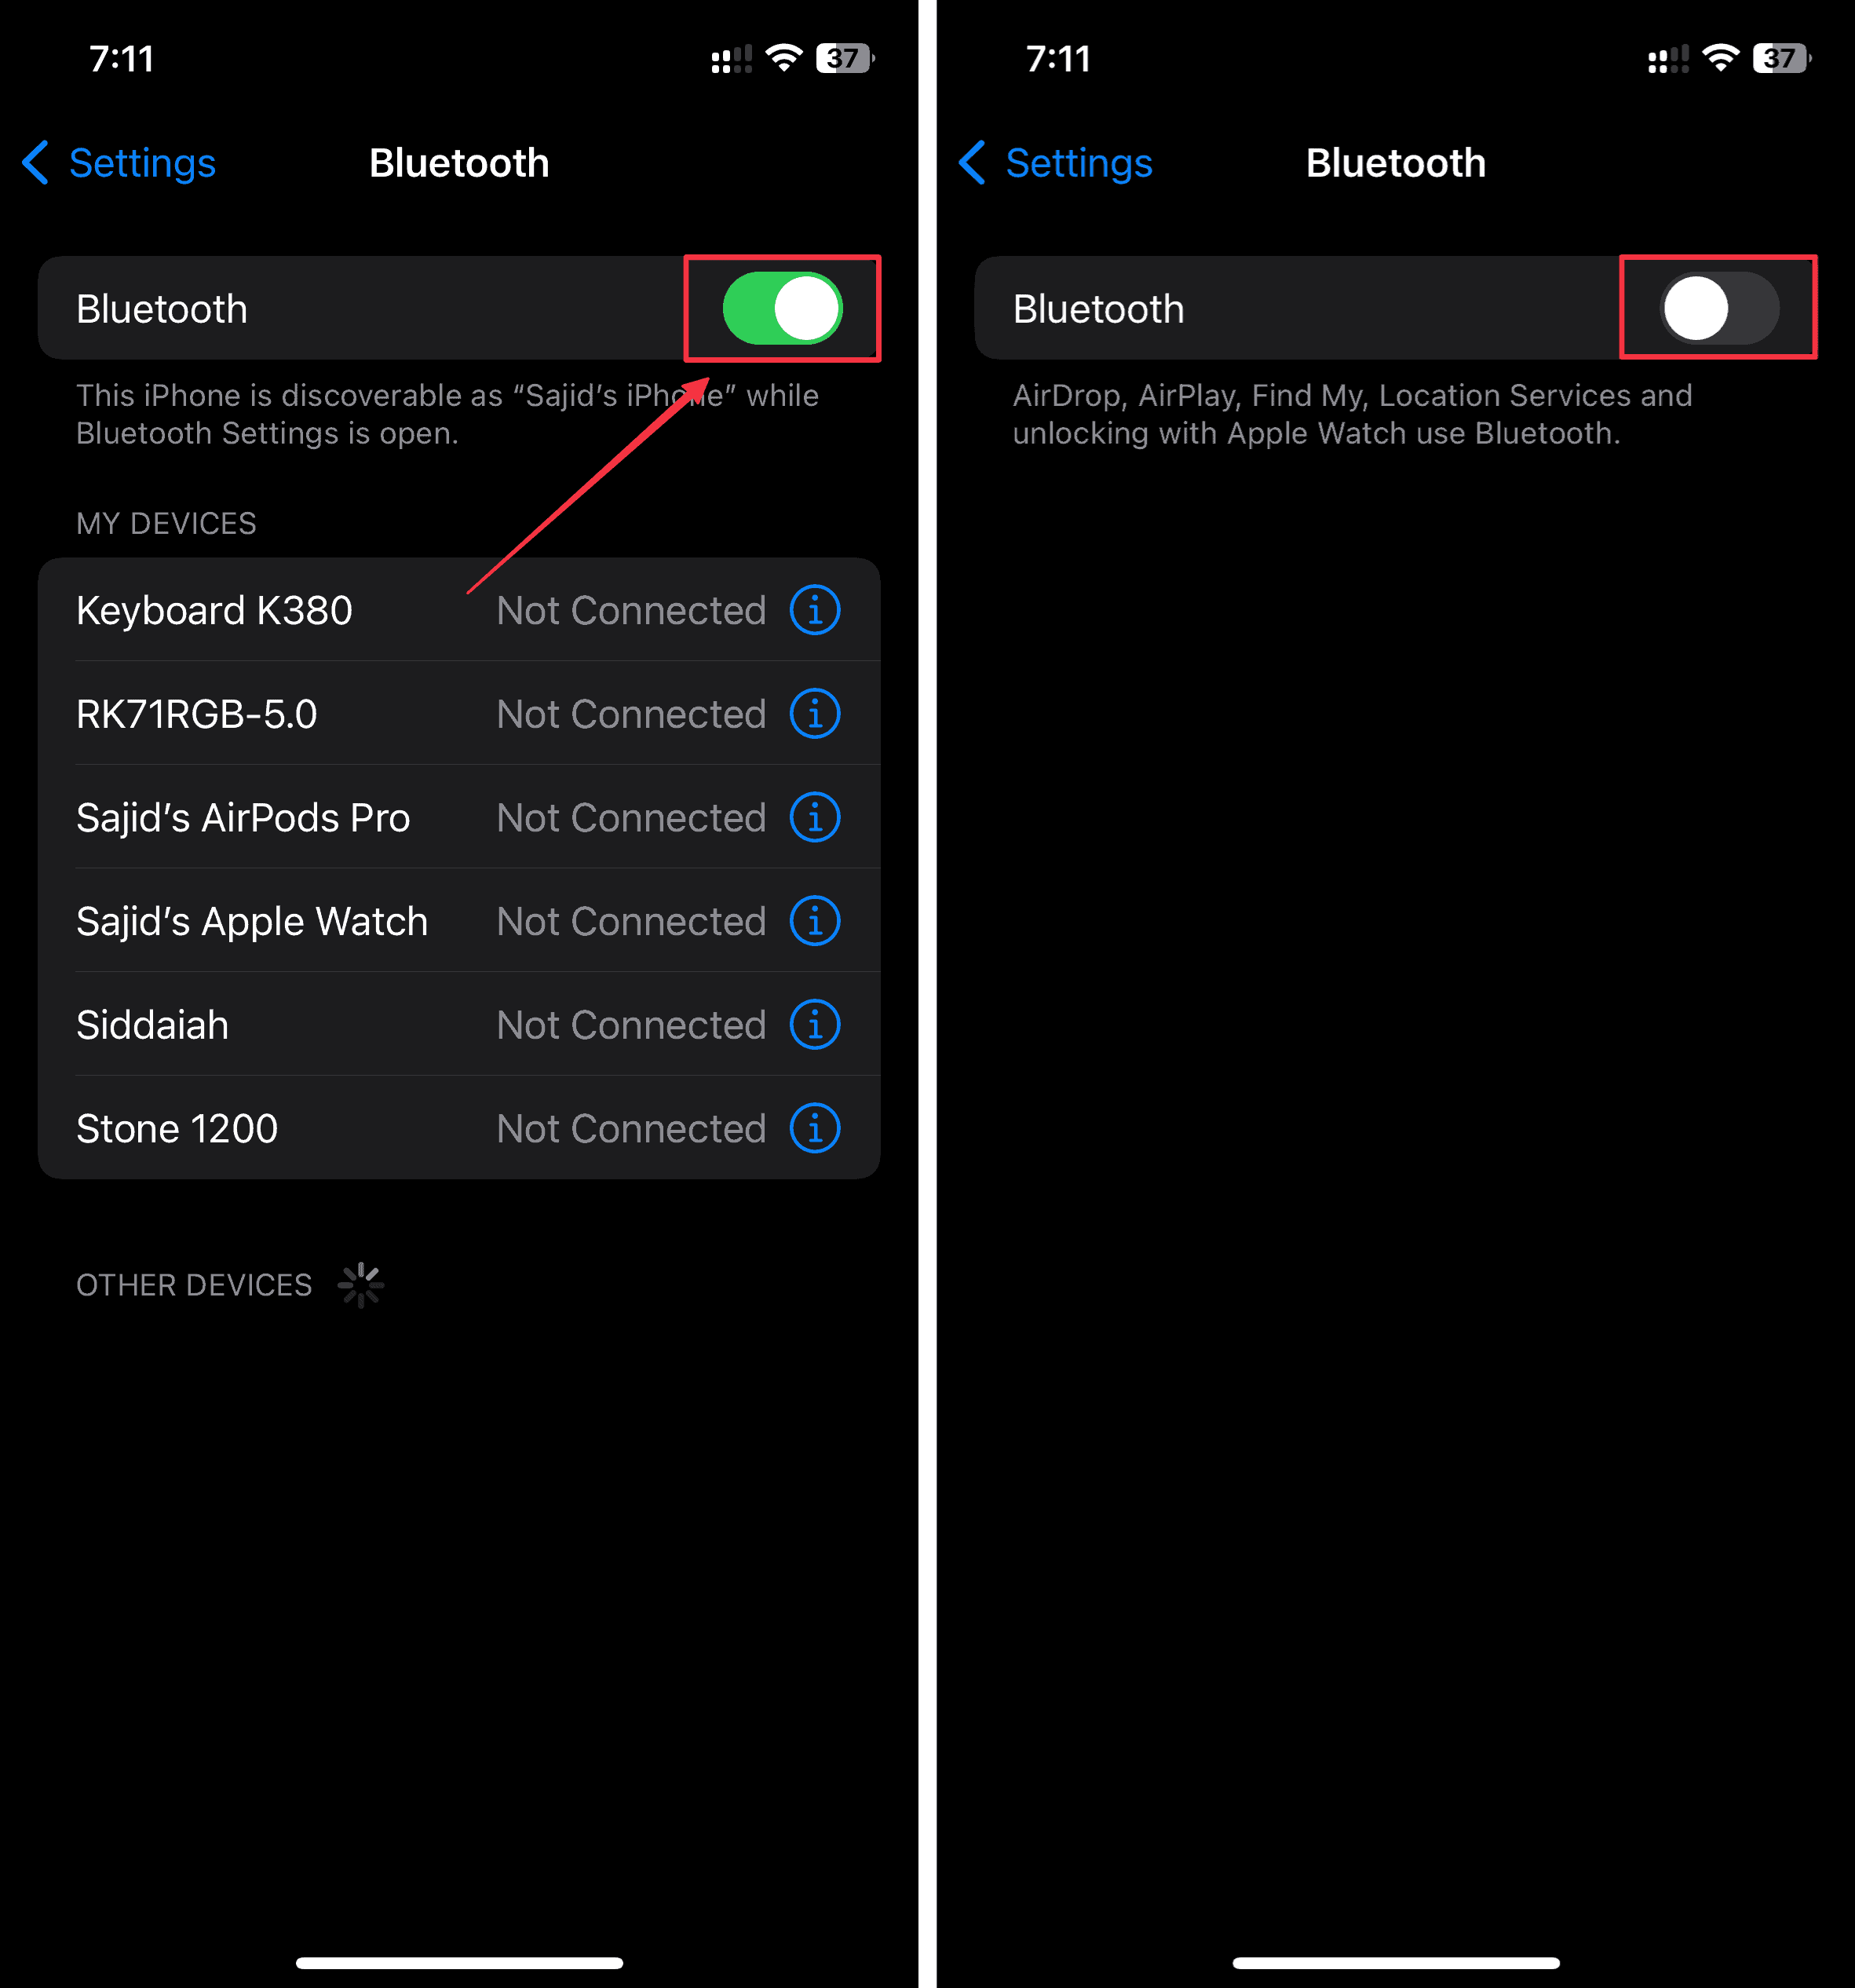 Disconnect and reconnect Bluetooth again